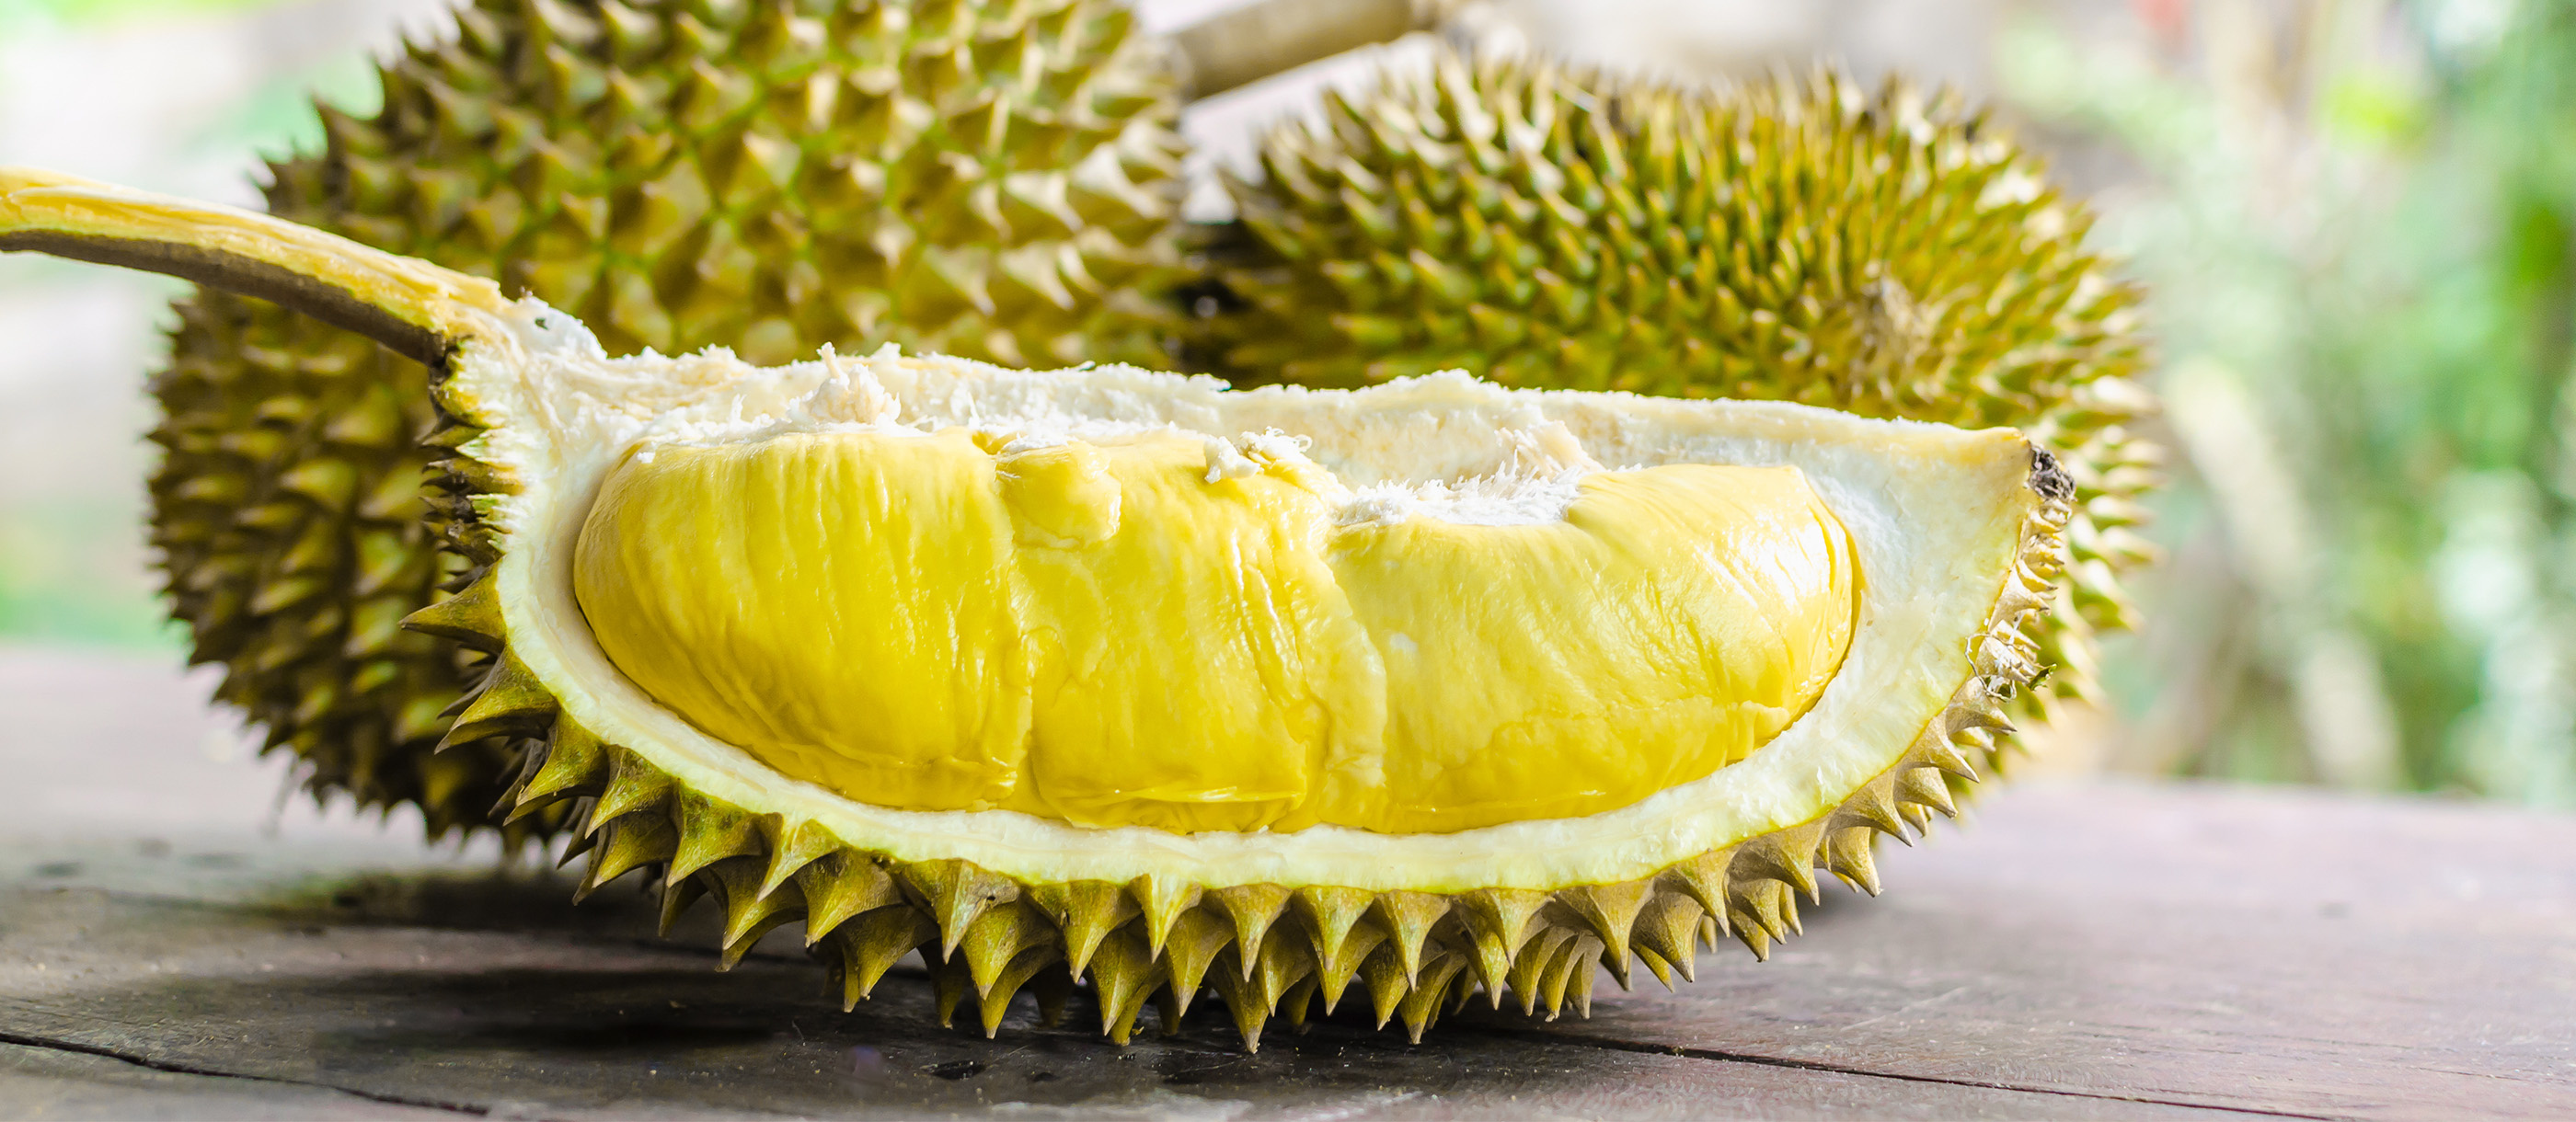 Durian: Local Tropical Fruit From Indonesia, Southeast Asia. 2800x1220 Dual Screen Background.